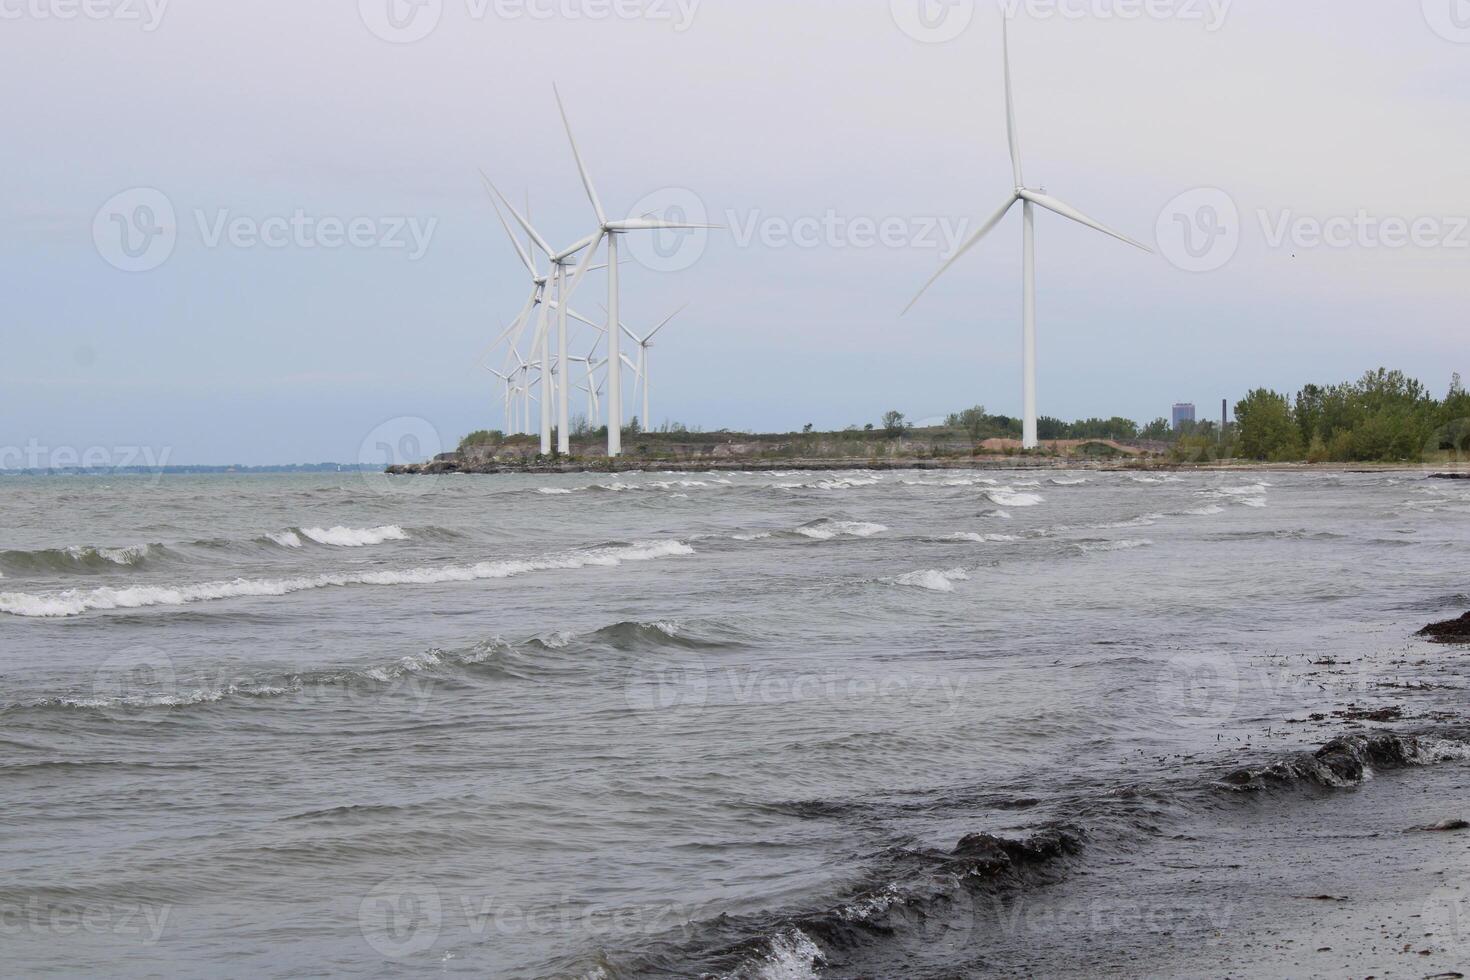 Woodlawn Beach State Park On Lake Erie In Buffalo New York photo